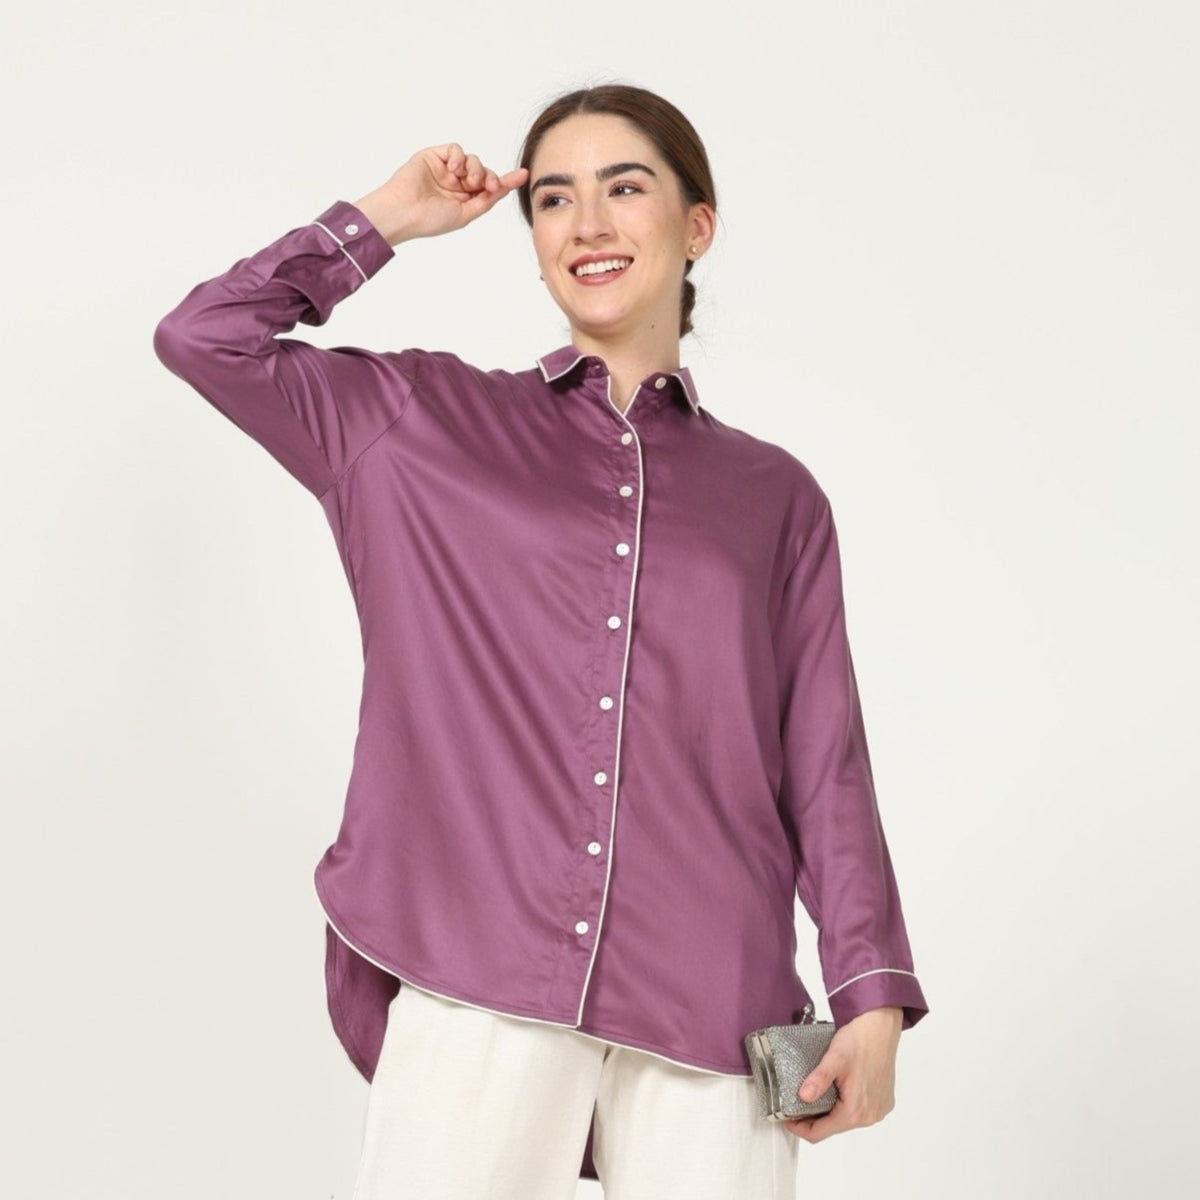 Jessica Shirt - Royal Purple With Contrast Edging - Limited Edition